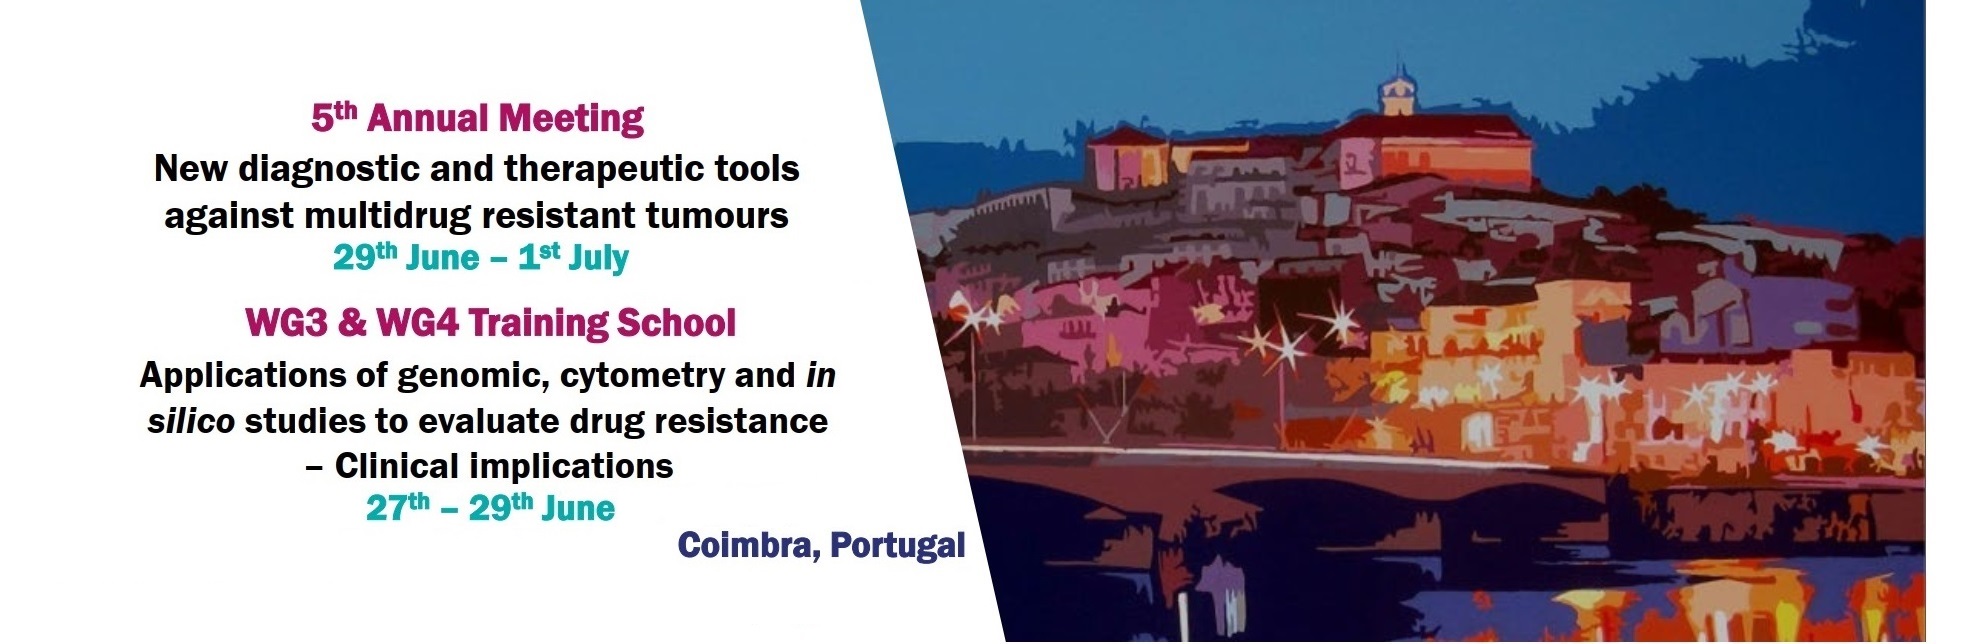 STRATAGEM's 4th co-located Annual Conference and WG3/4 Training School to be held in Coimbra, Portugal June/July 2022